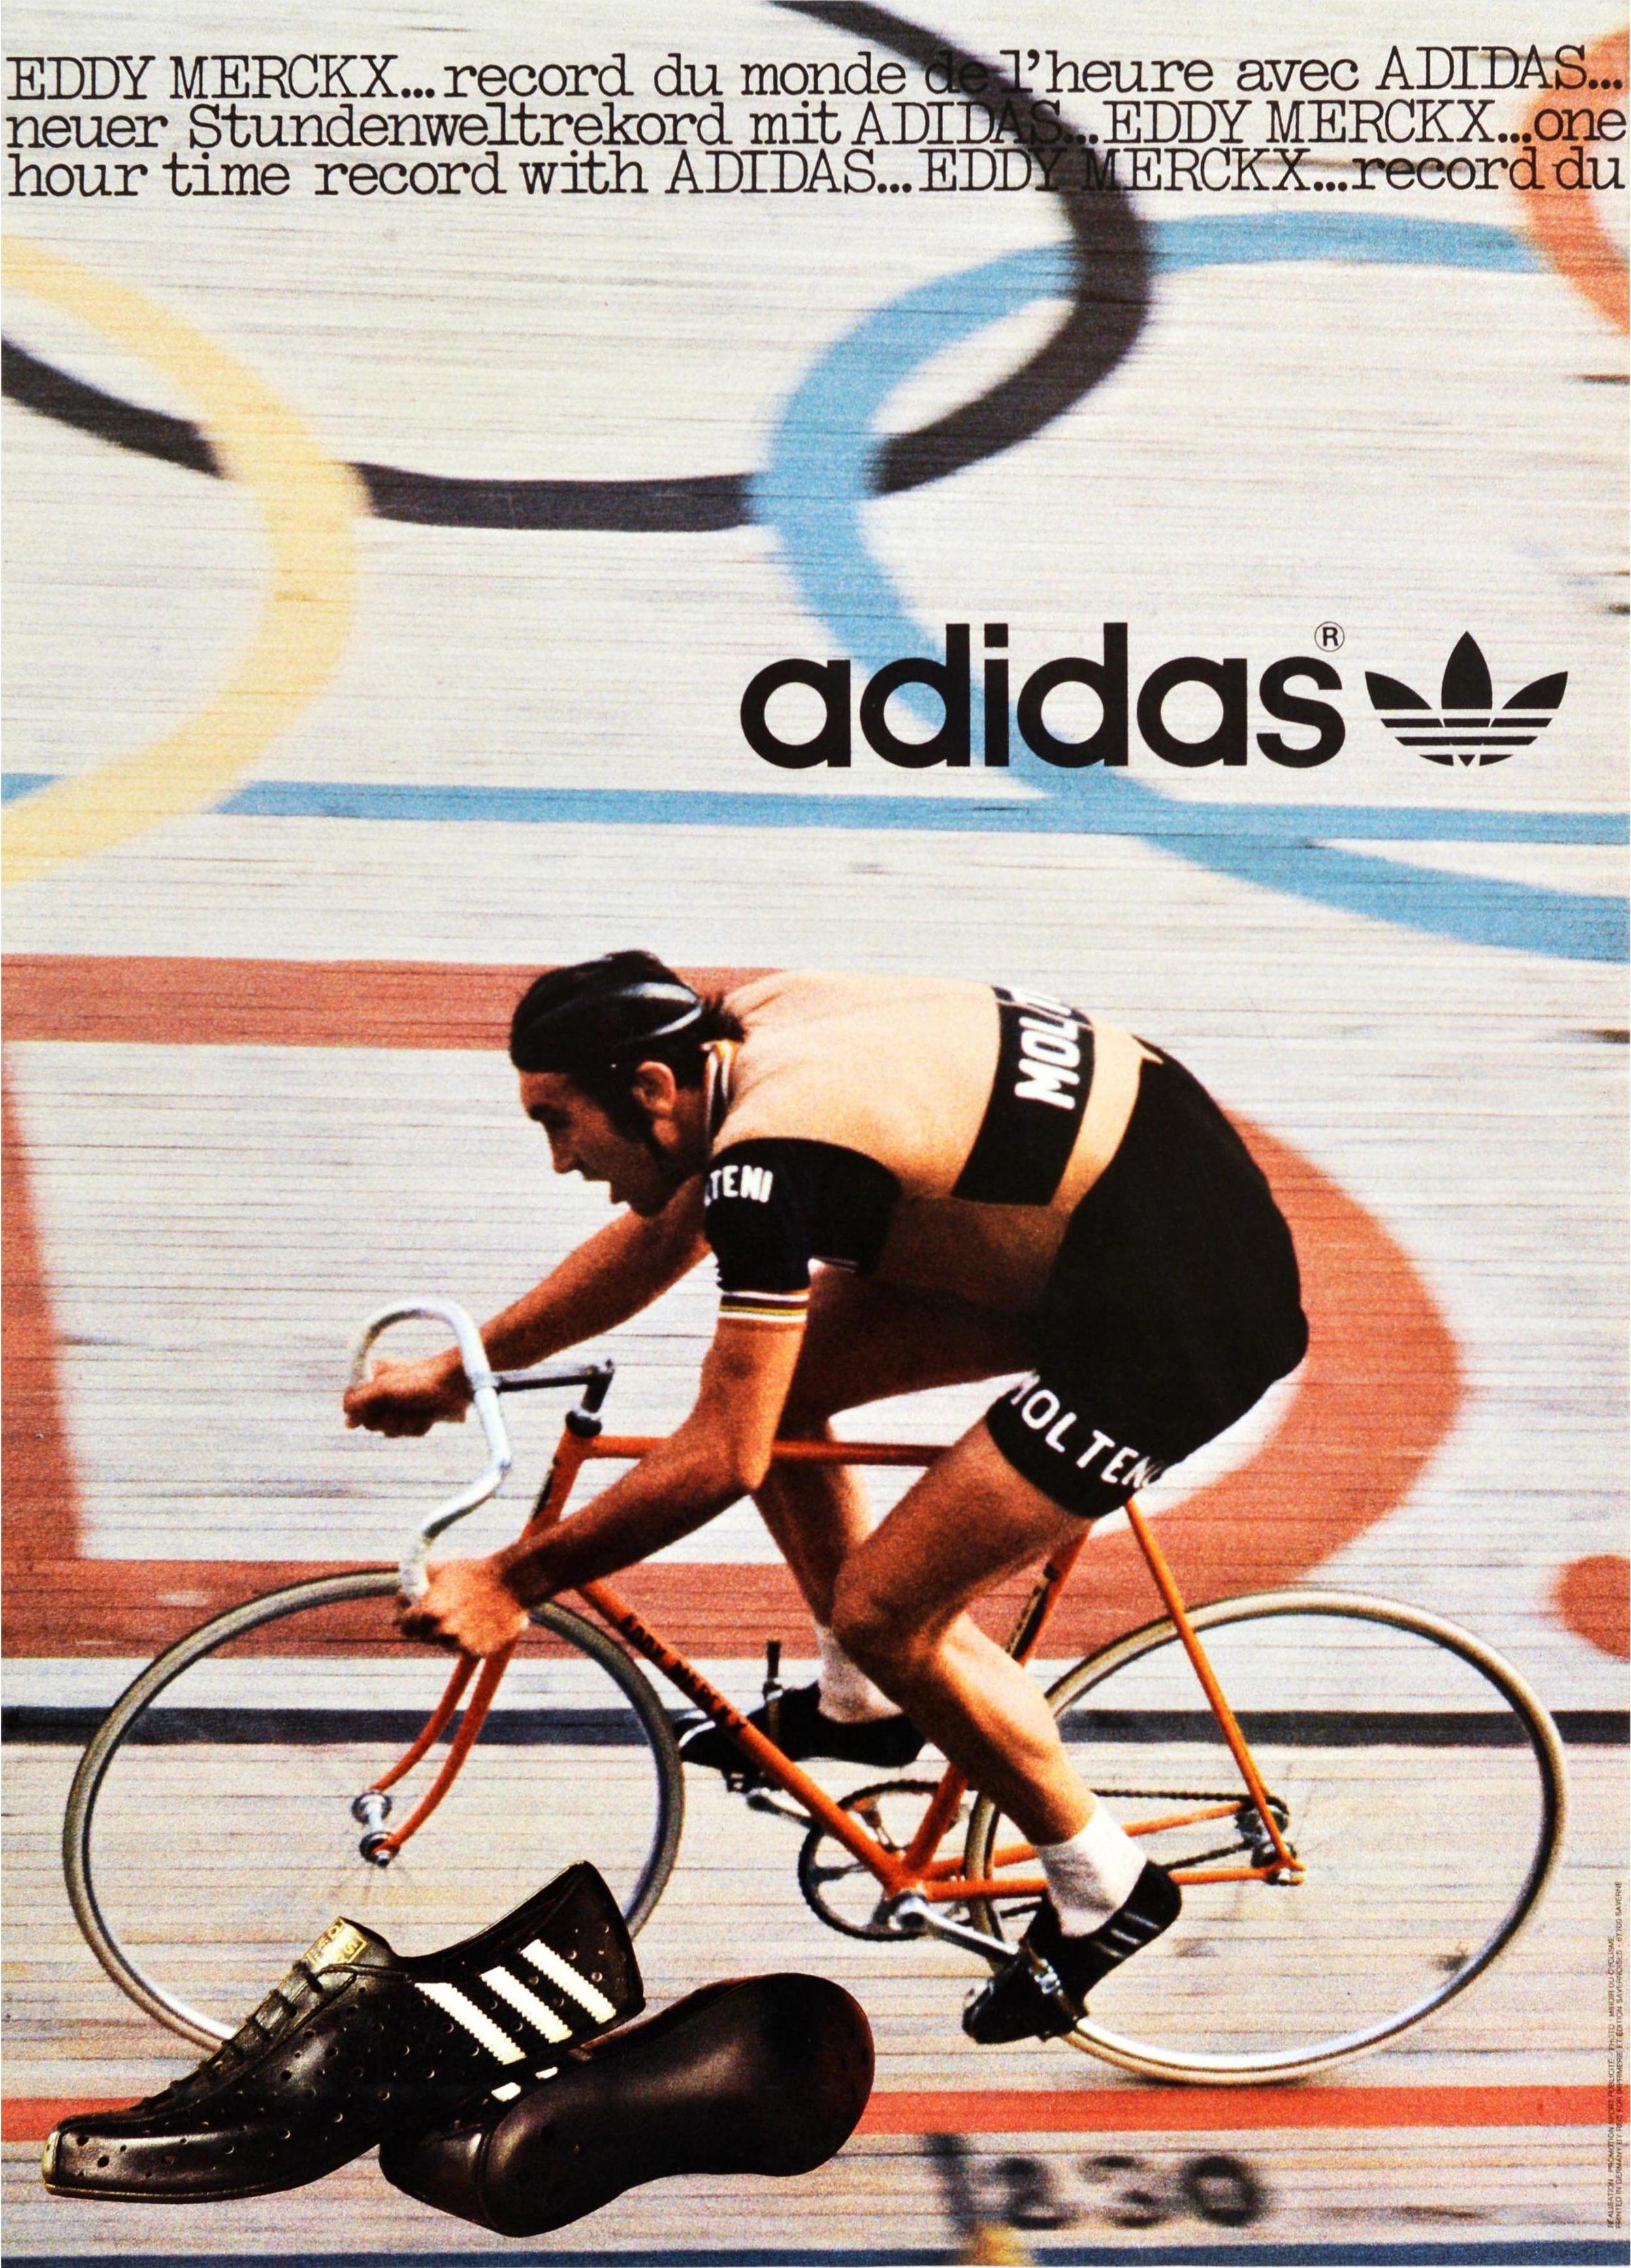 Unknown - Original Vintage Poster Adidas Sport Shoes Eddy Merckx World  Record Cyclist Race at 1stDibs | eddy merckx poster, adidas eddy merckx  cycling shoes, vintage adidas poster